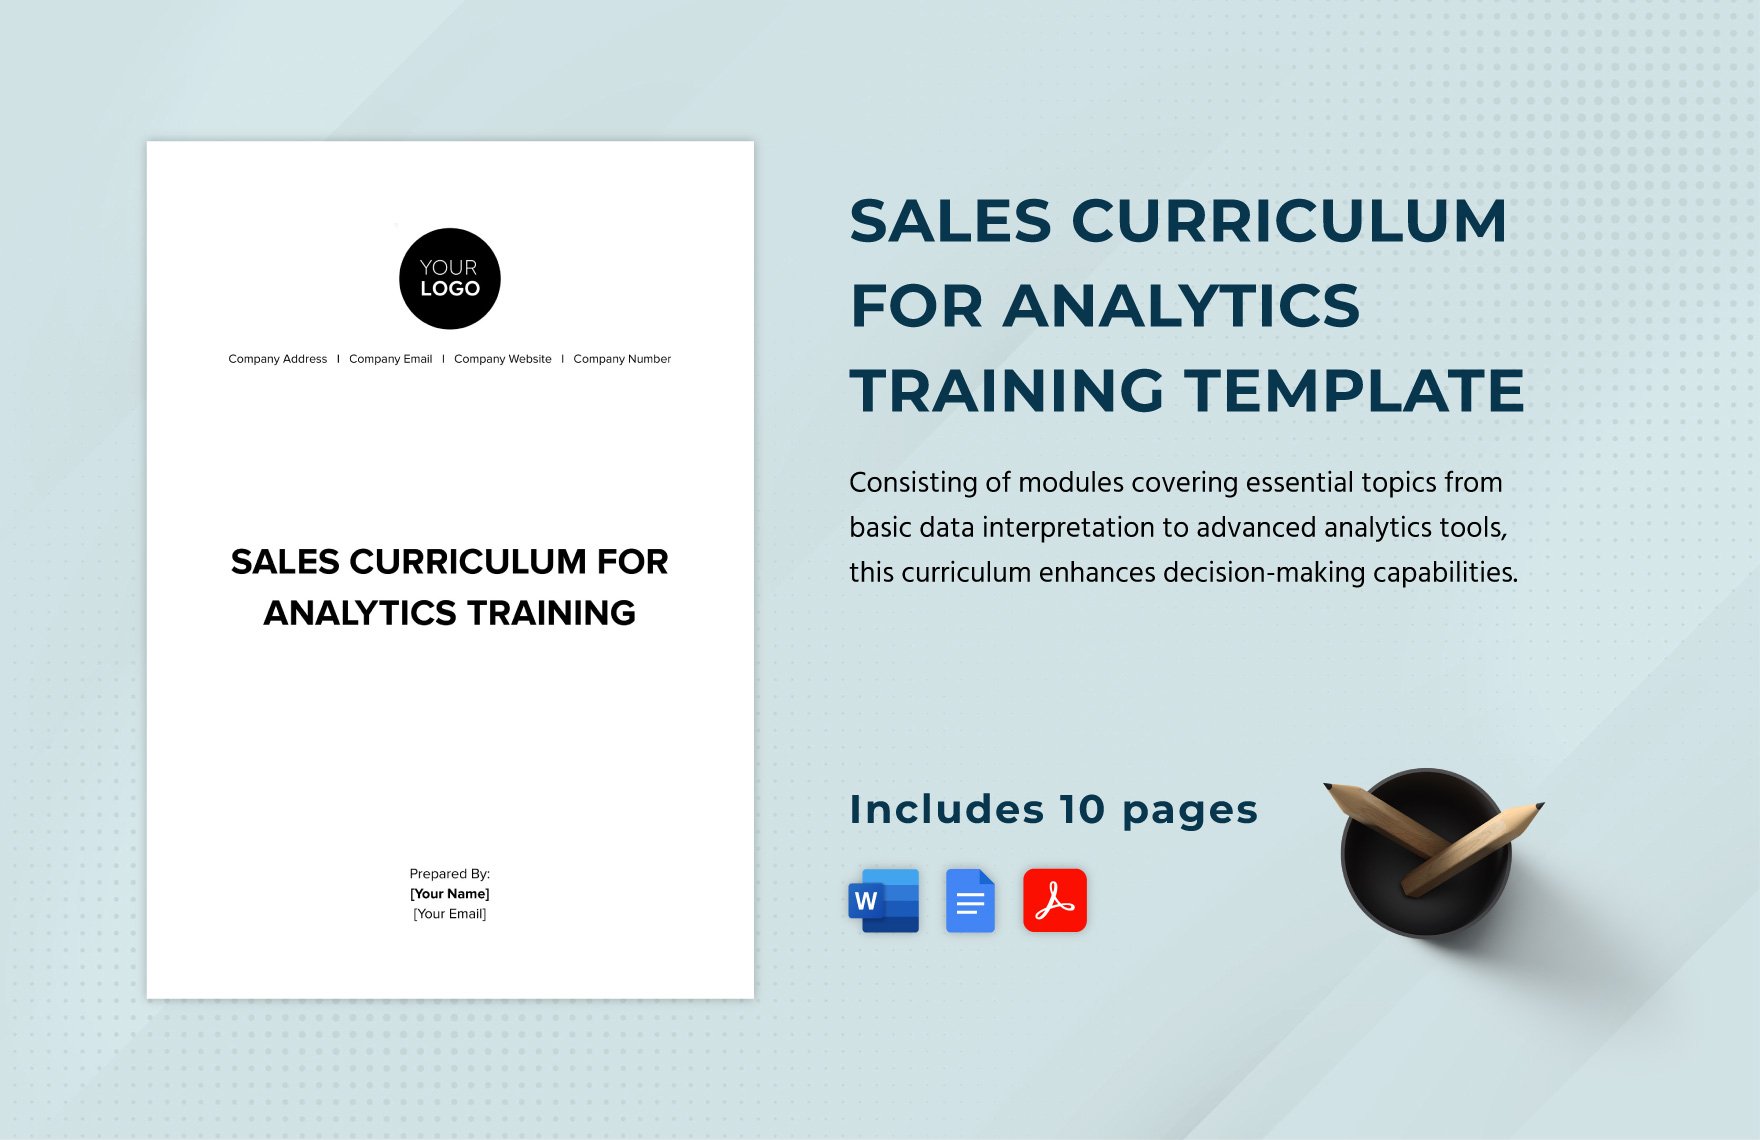 Sales Curriculum for Analytics Training Template